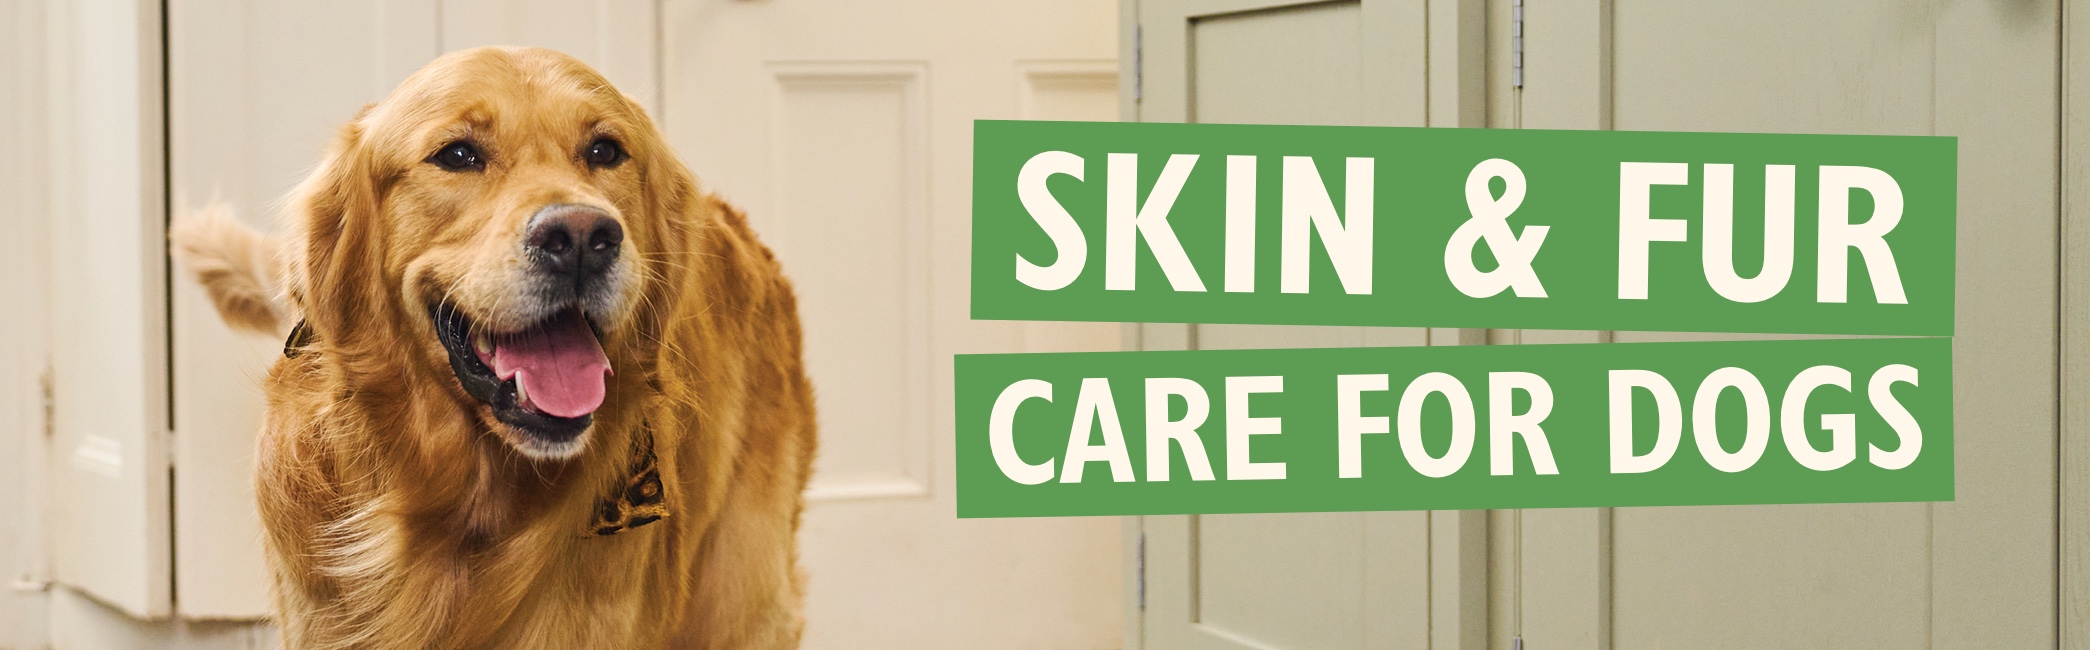 Skin & fur care for dogs